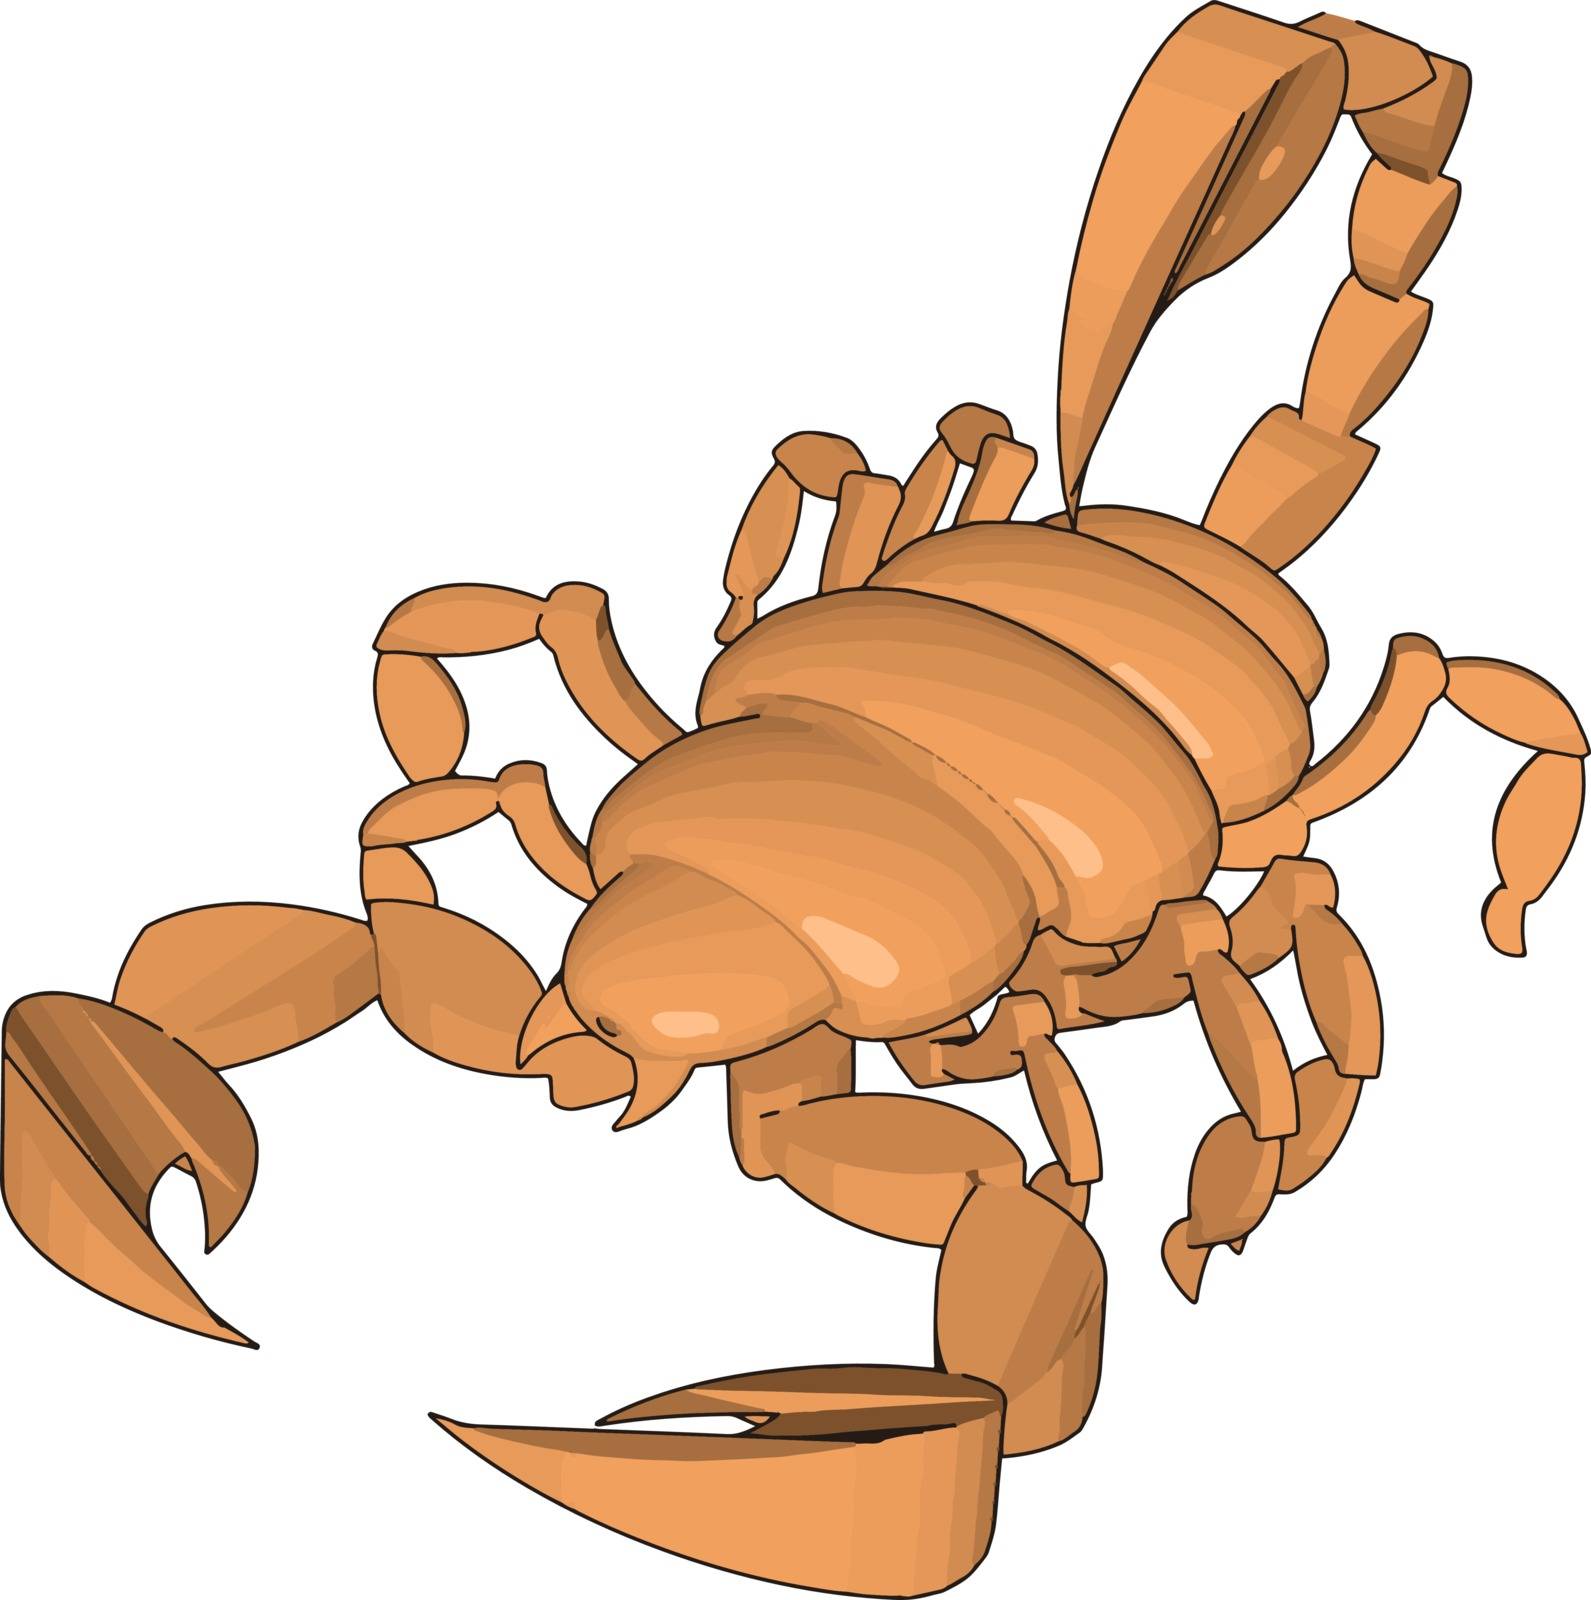 Mode of a 3d scorpion, illustration, vector on white background. by Morphart